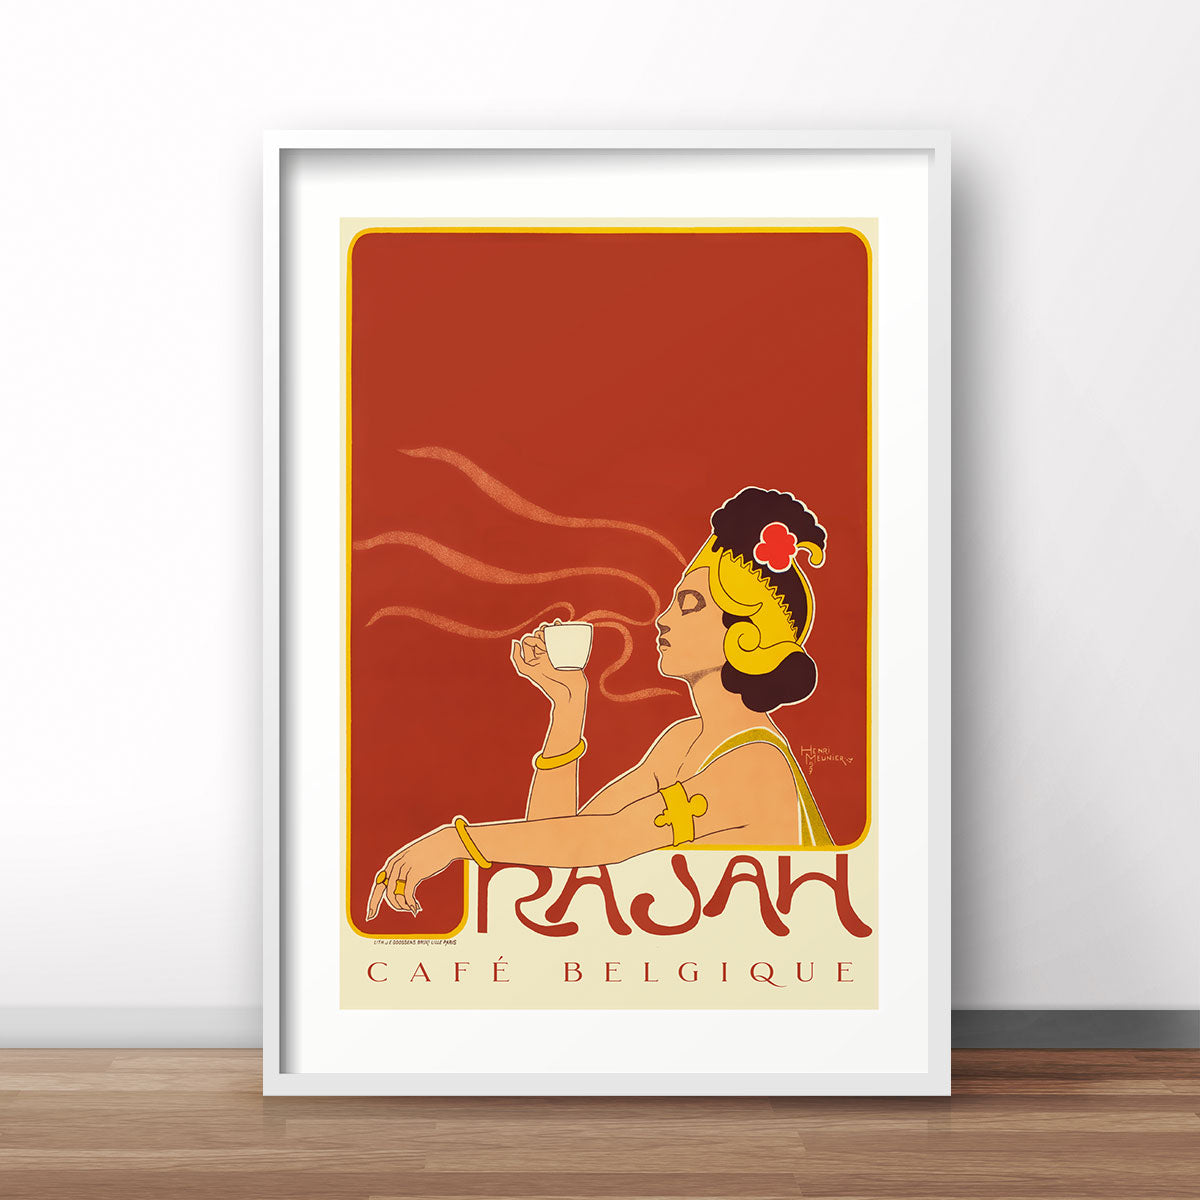 Rajah coffee cafe vintage retro poster print from Places We Luv